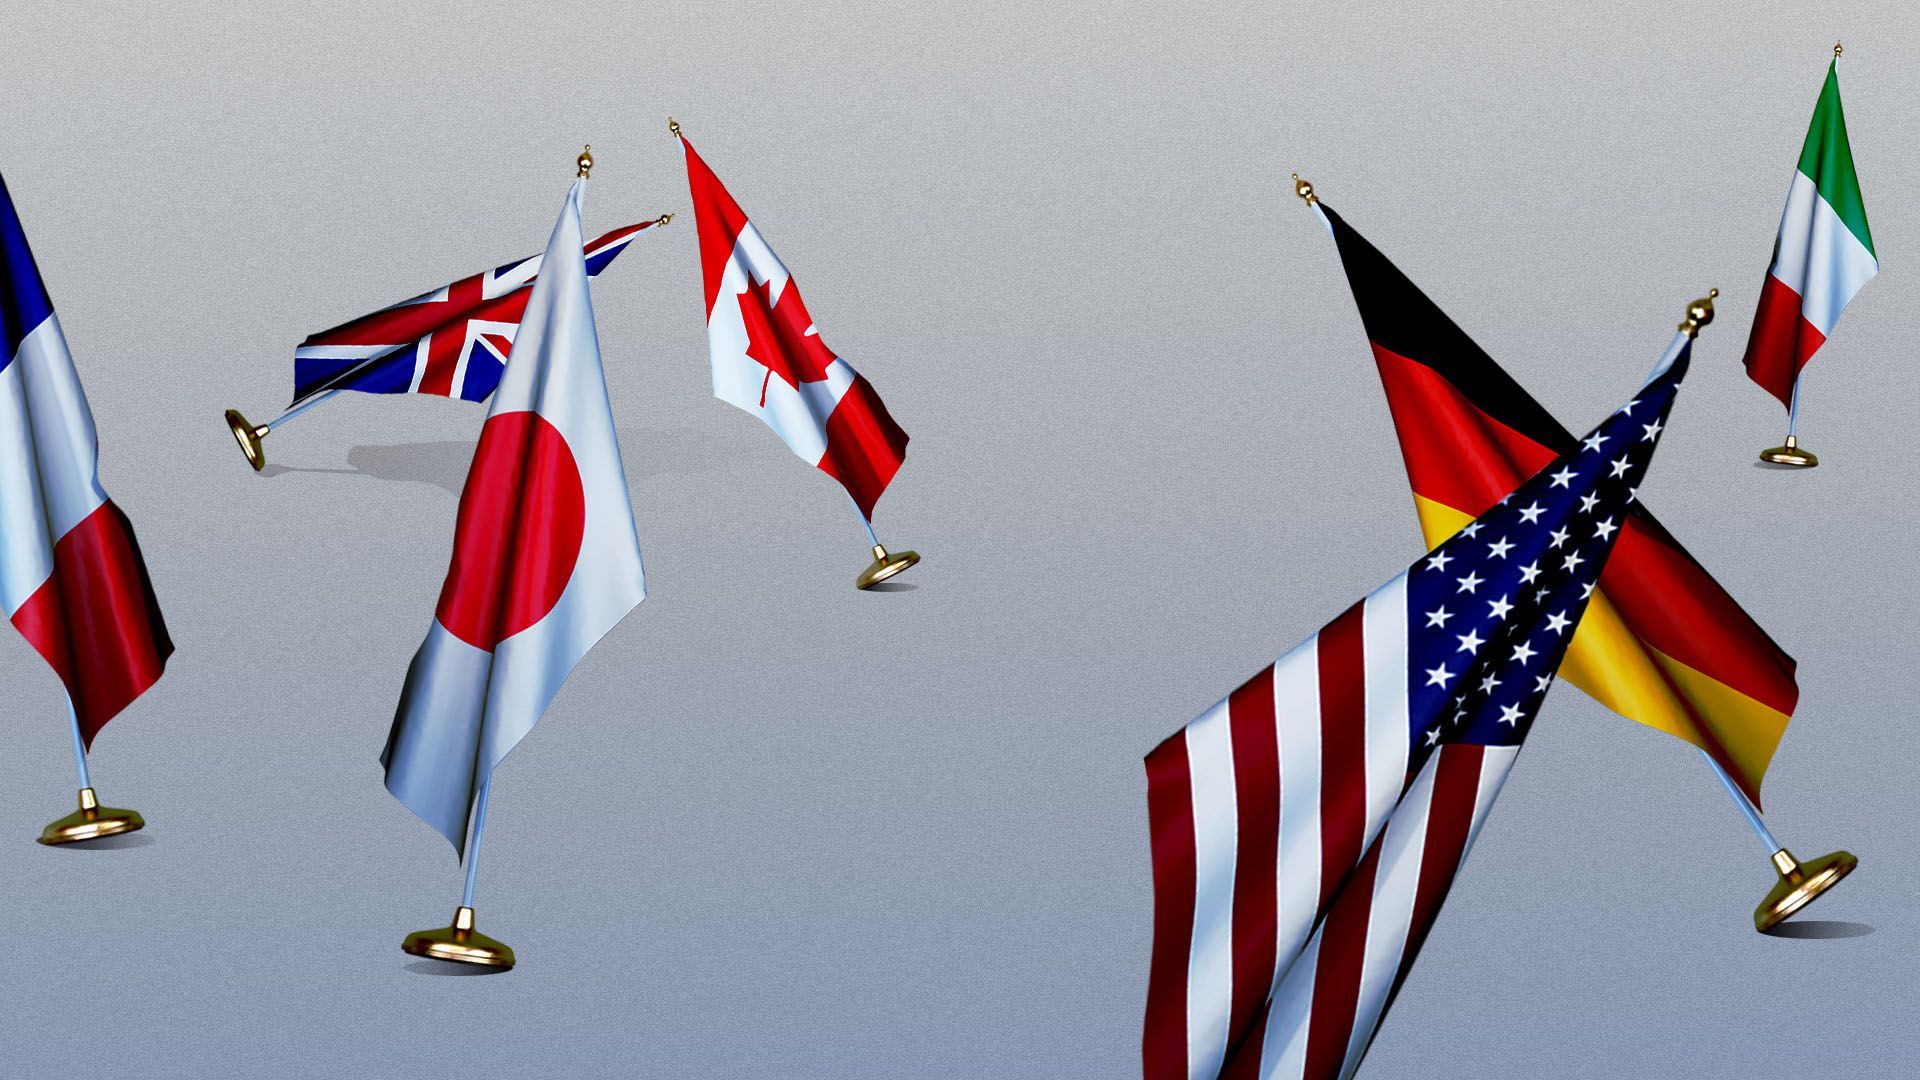 Illustration of the G7 flags falling over